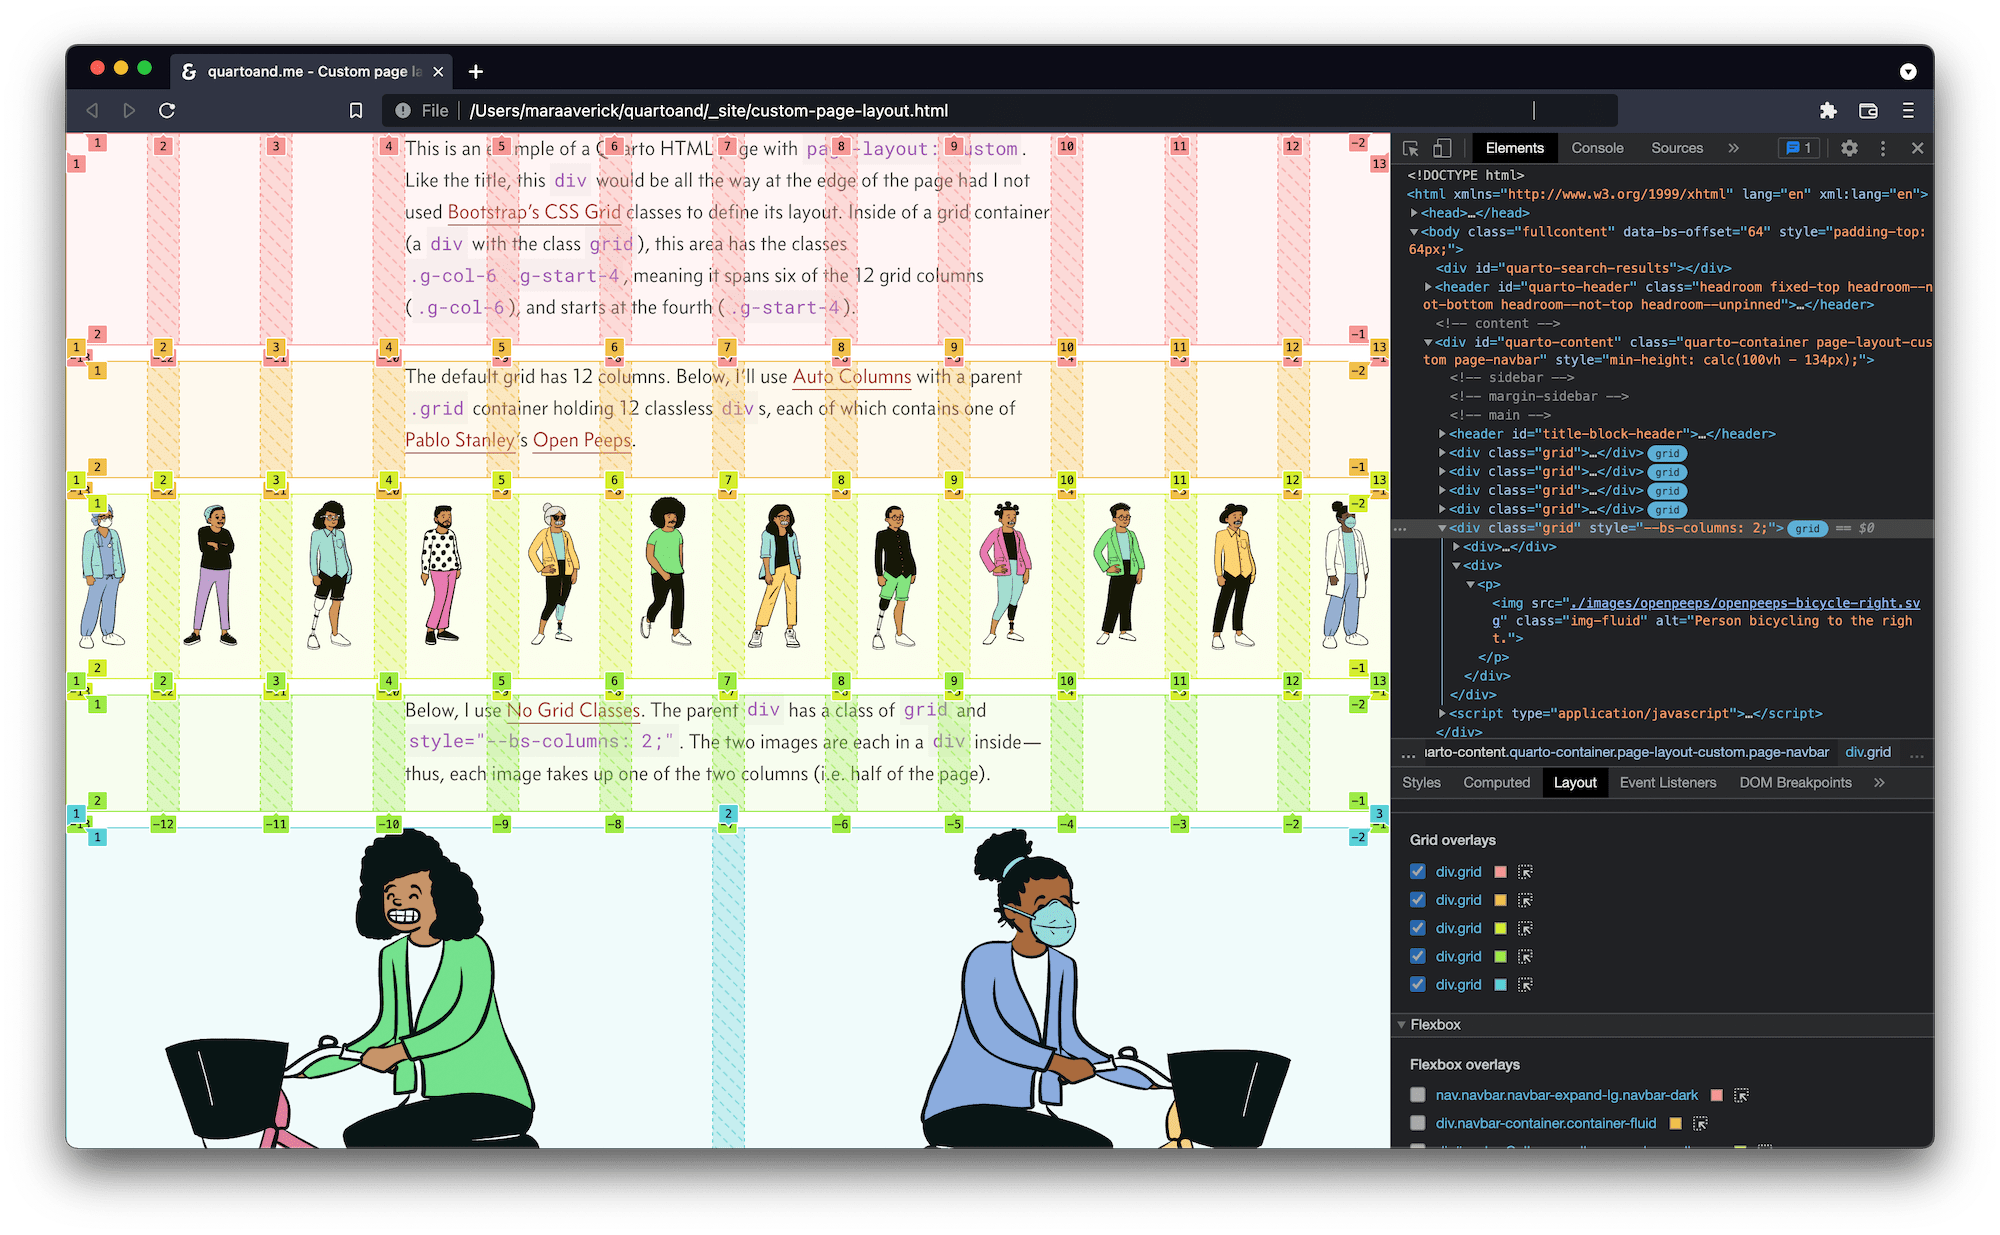 Screenshot of custom layout page with the browser grid inspector overlaid. Browser developer tools are shown in the right-hand section of the browser window.